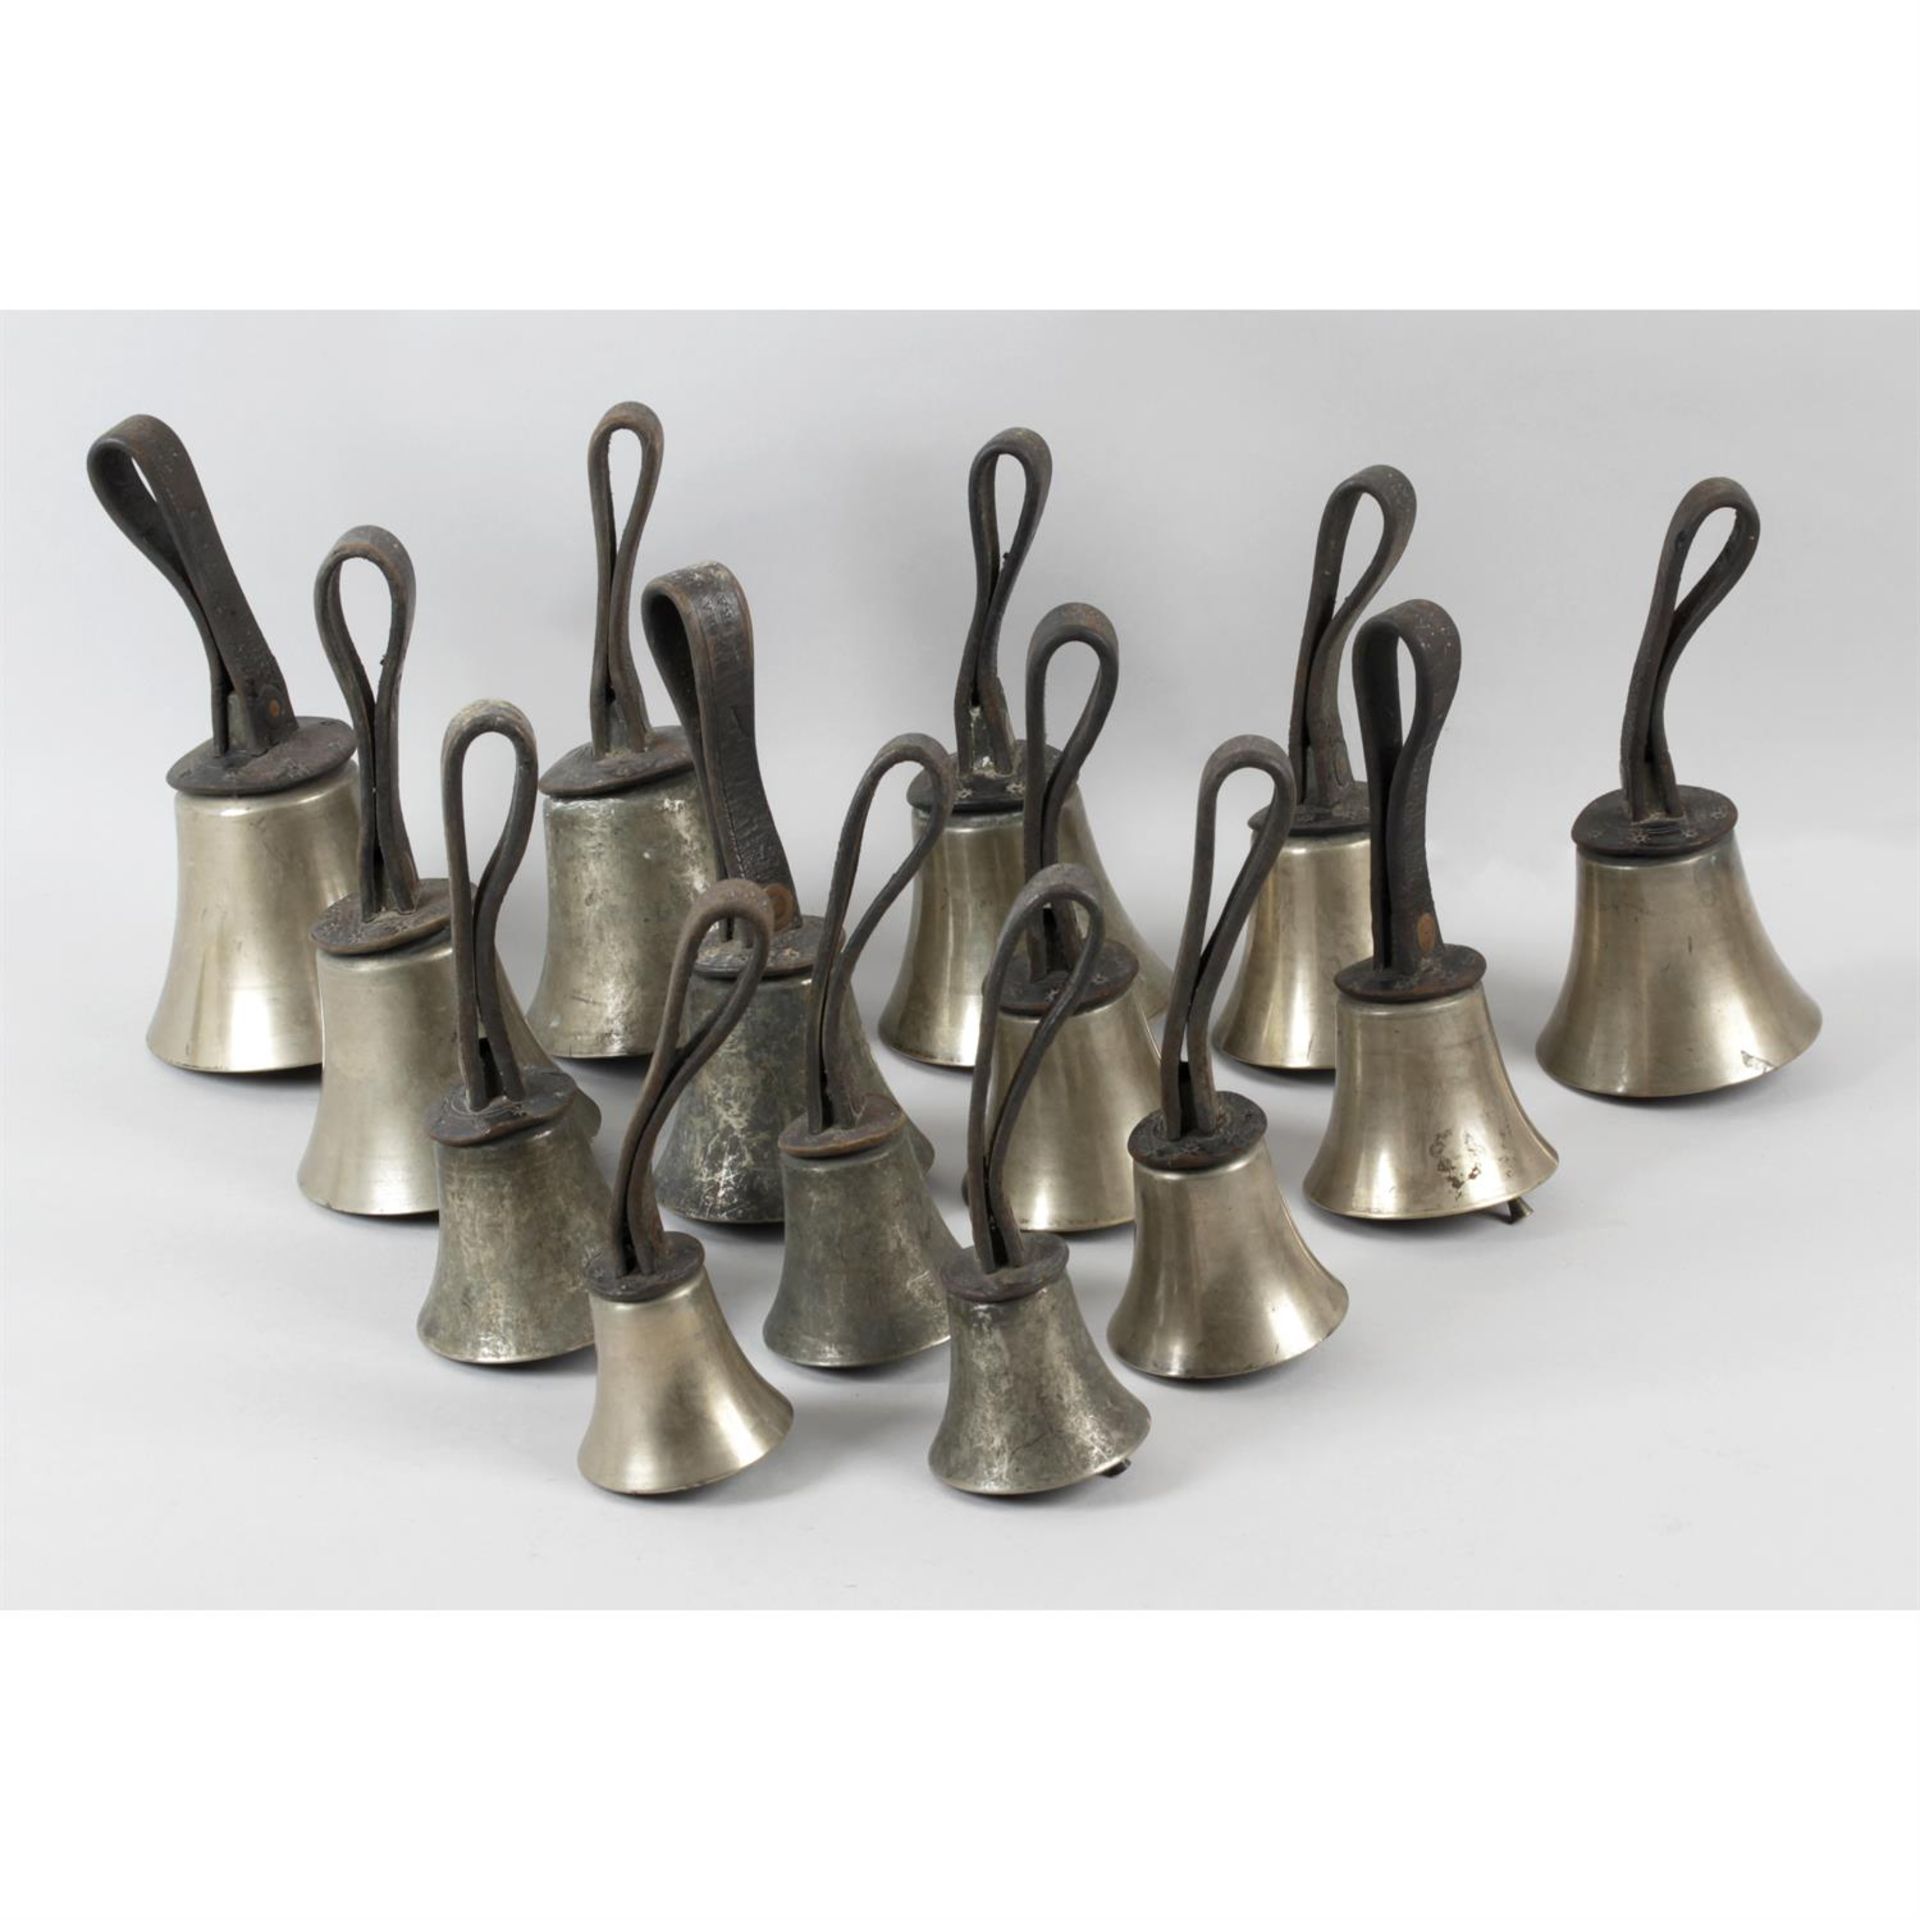 A collection of fourteen Victorian campanology hand bells by J. Shaw and Co. Bradford.